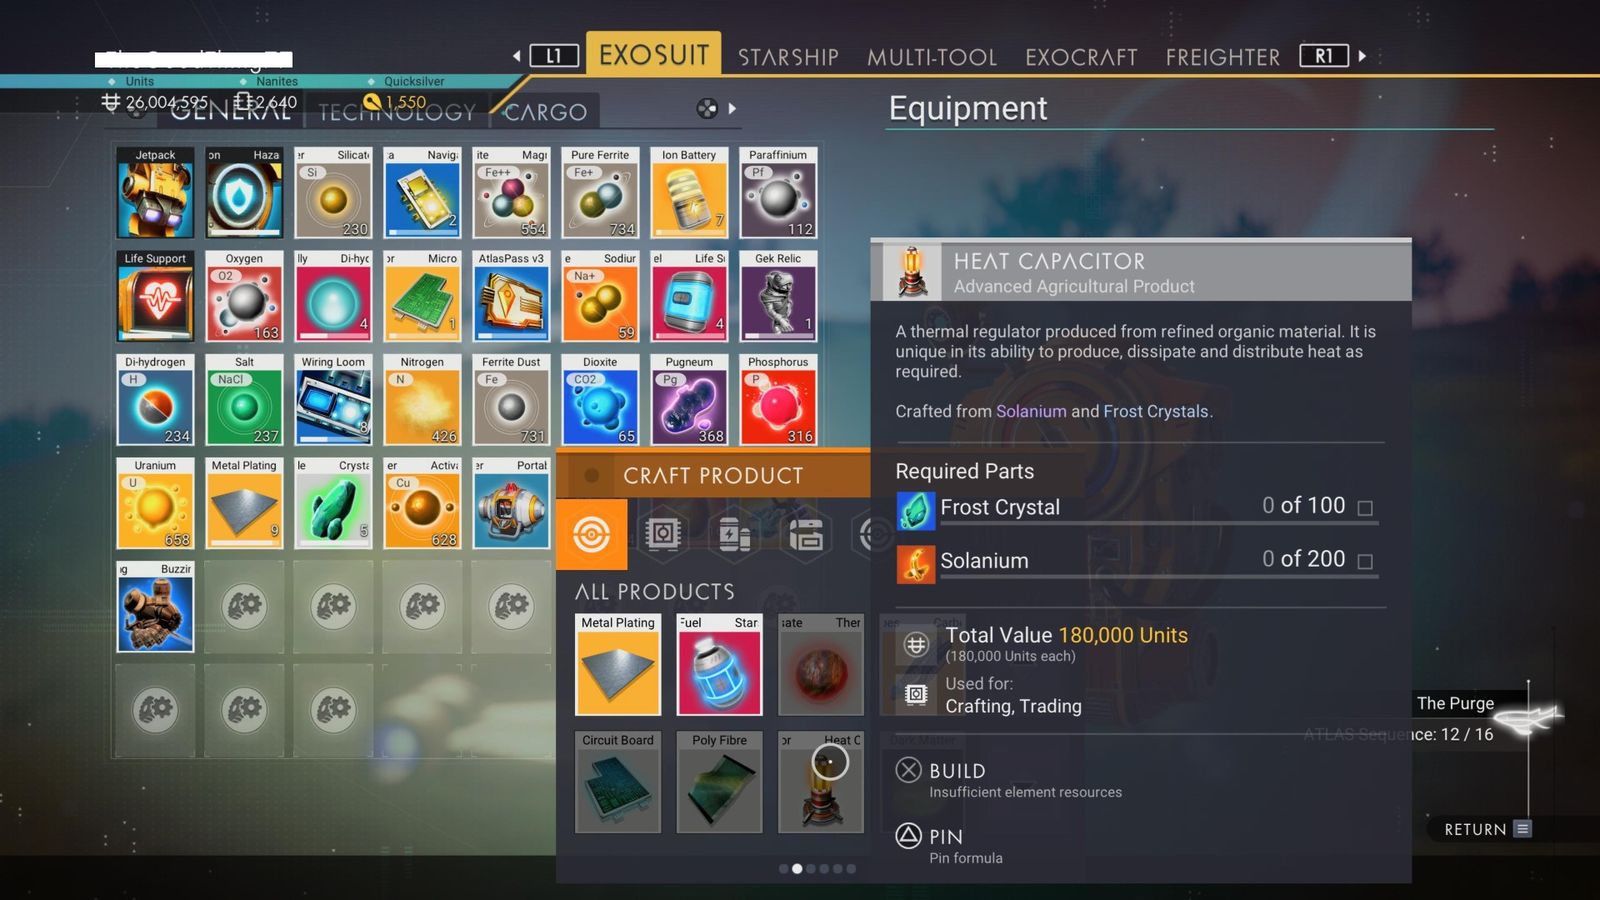 The recipe for crafting at Heat Capacitor shown in the inventory in No Man's Sky.